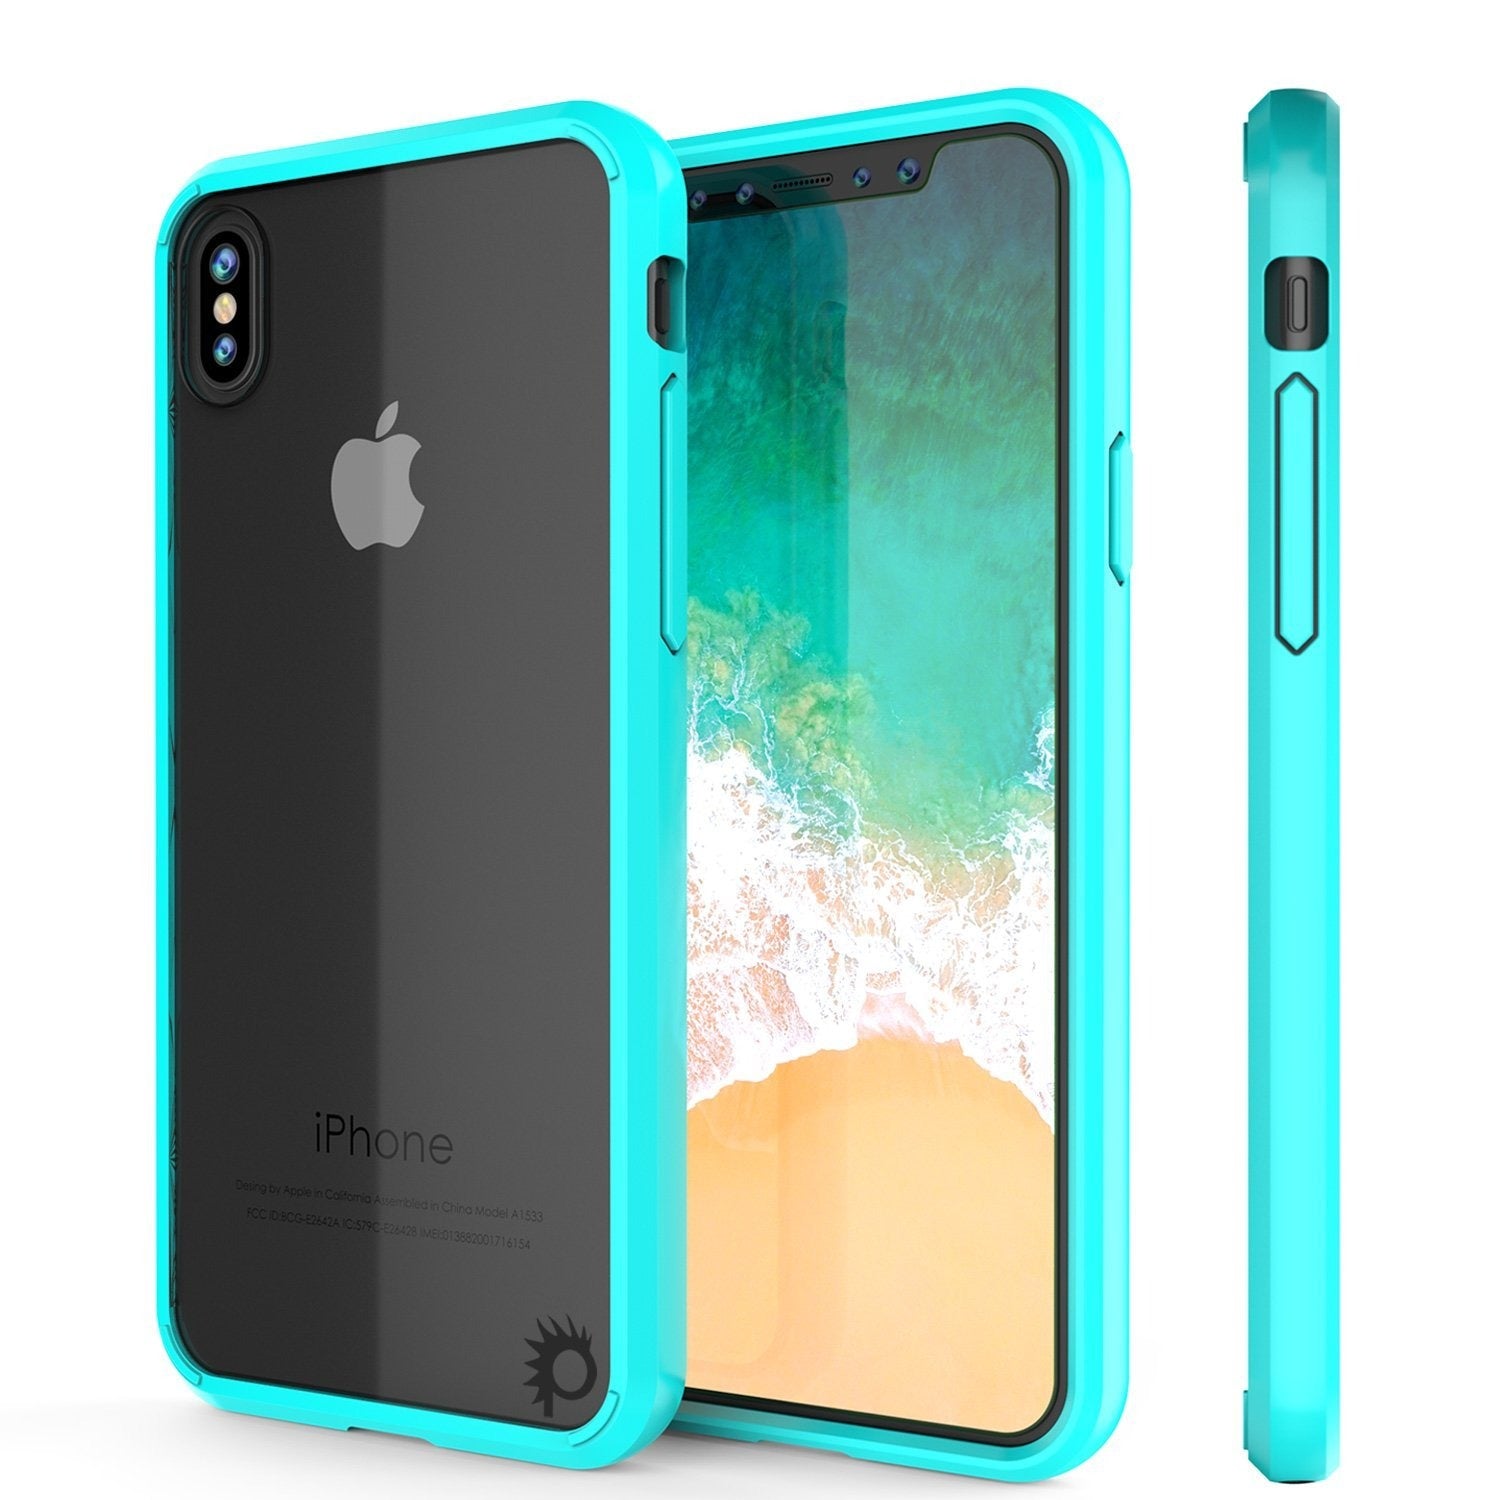 iPhone XS Max Case, PUNKcase [Lucid 2.0 Series] [Slim Fit] Armor Cover [Teal]